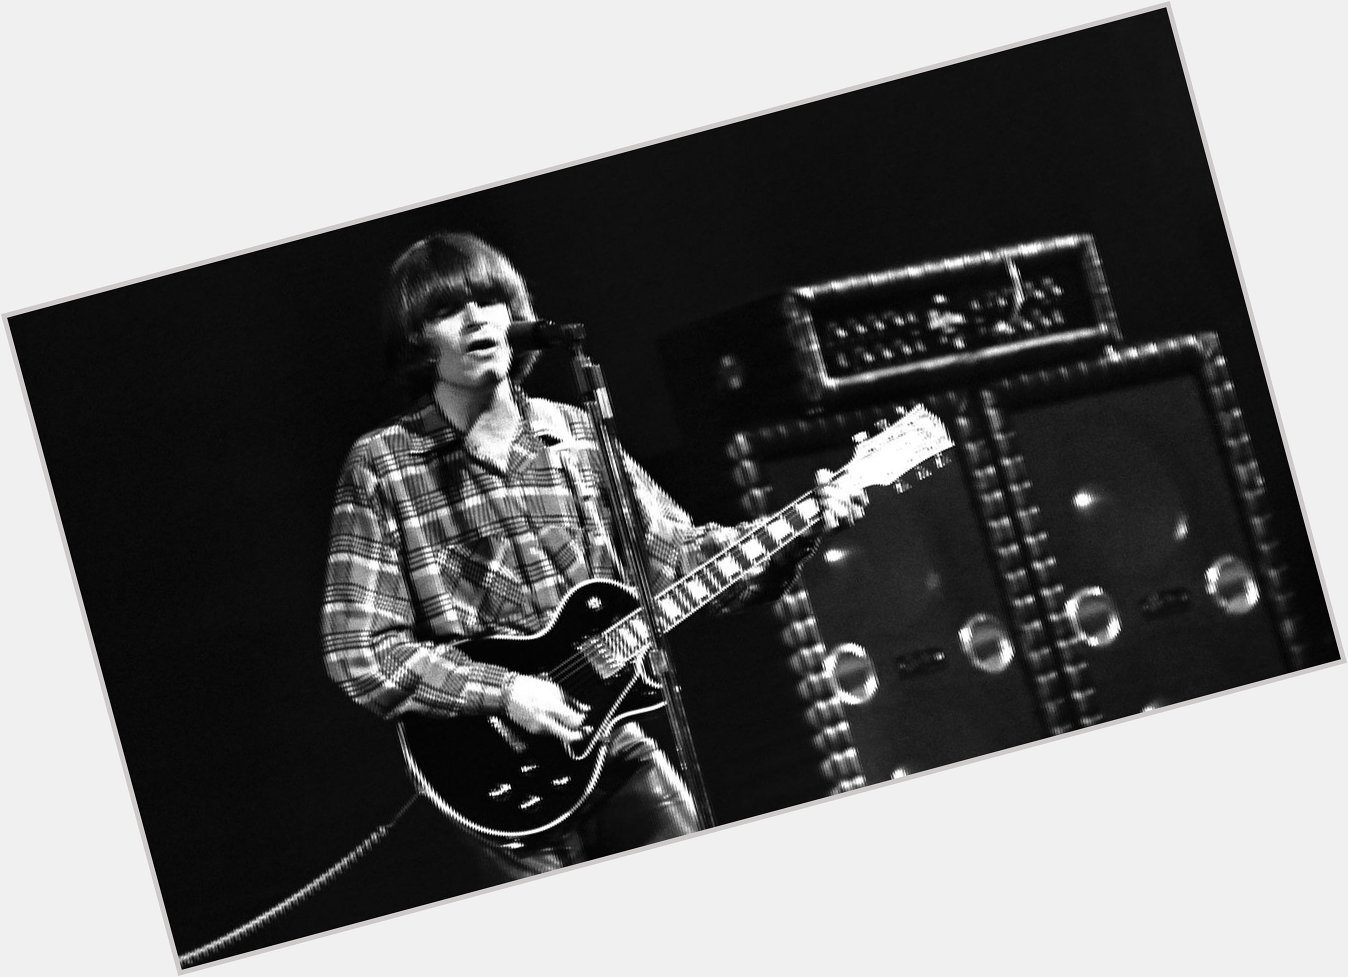 Happy birthday John Fogerty! Open normal hours today for Memorial Day. Come dig for buried treasure... 